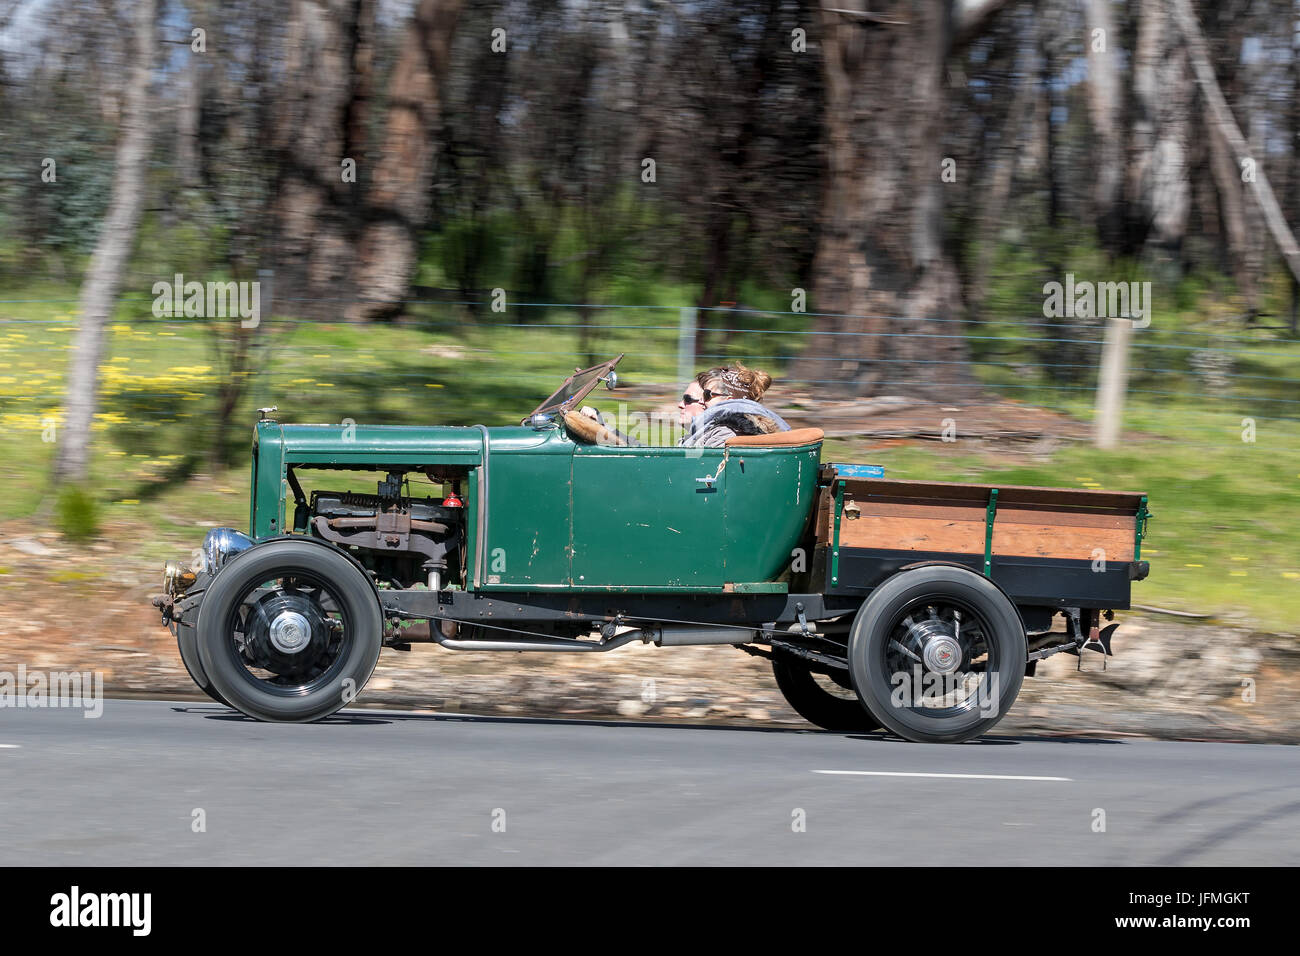 Vintage 1930 Chevrolet Capitol Buckboard driving on country roads near the town of Birdwood, South Australia. Stock Photo